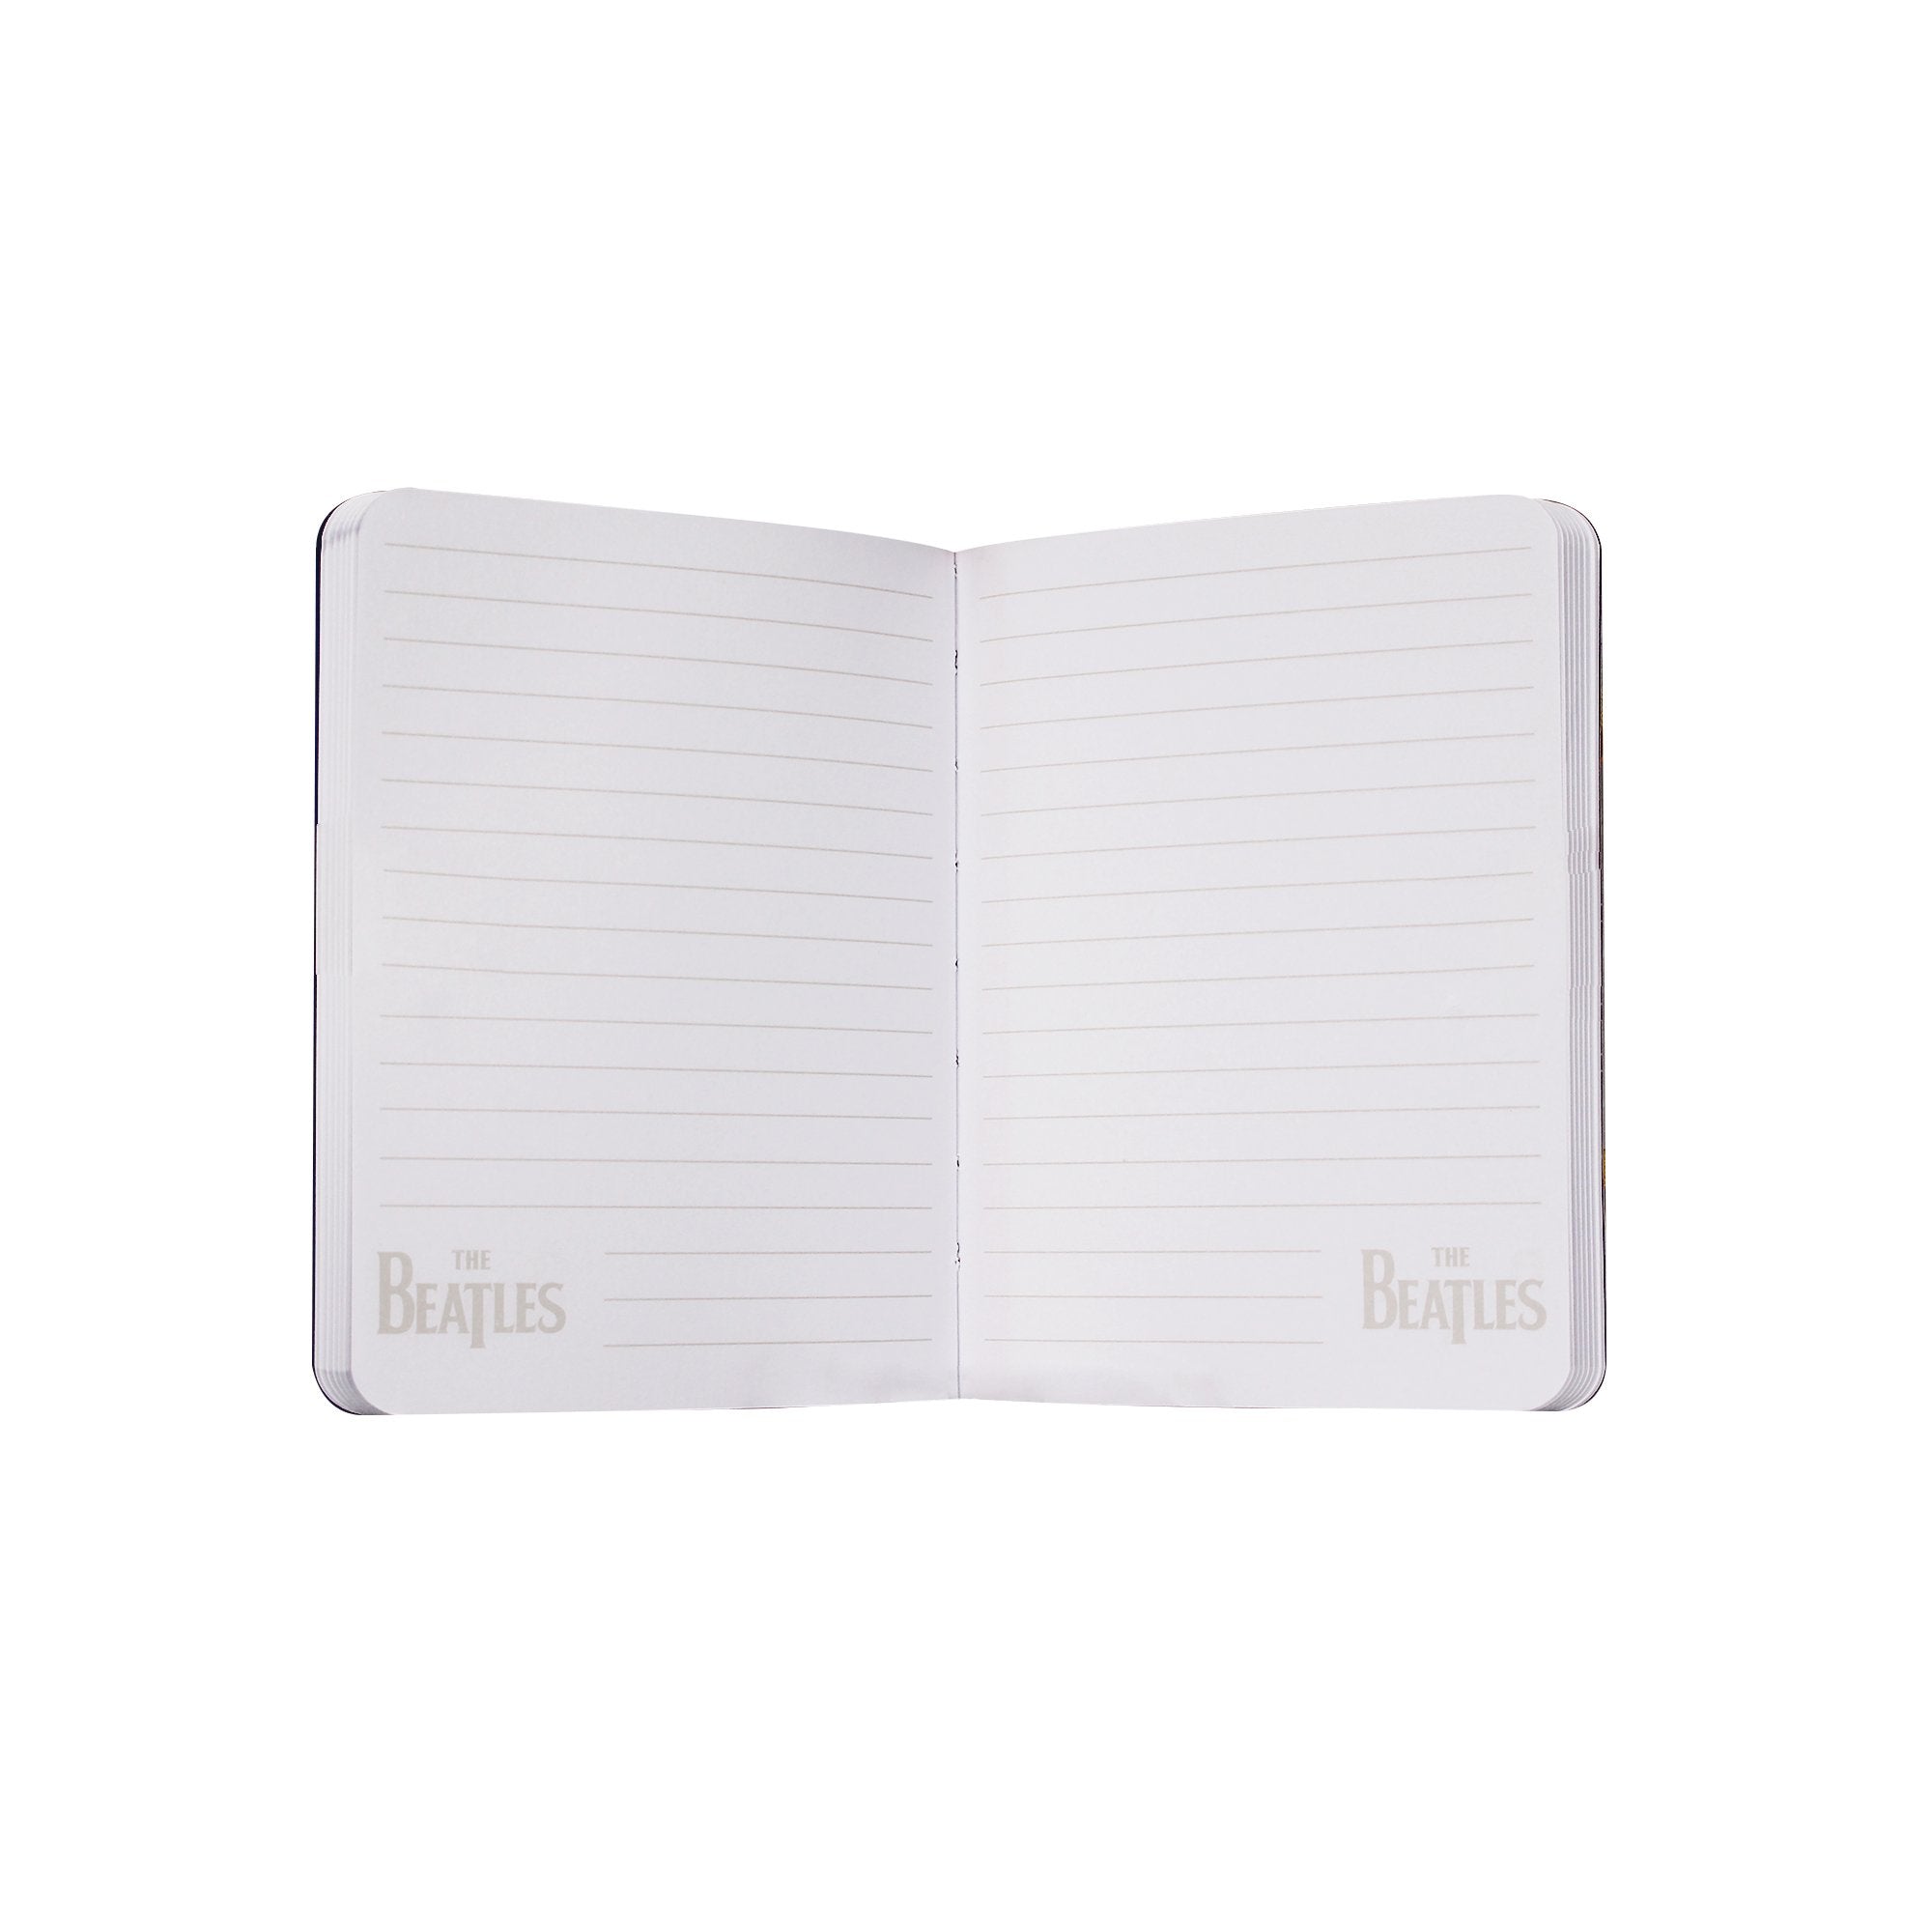 A6 Notebook (Softcover) - The Beatles (Logo White)